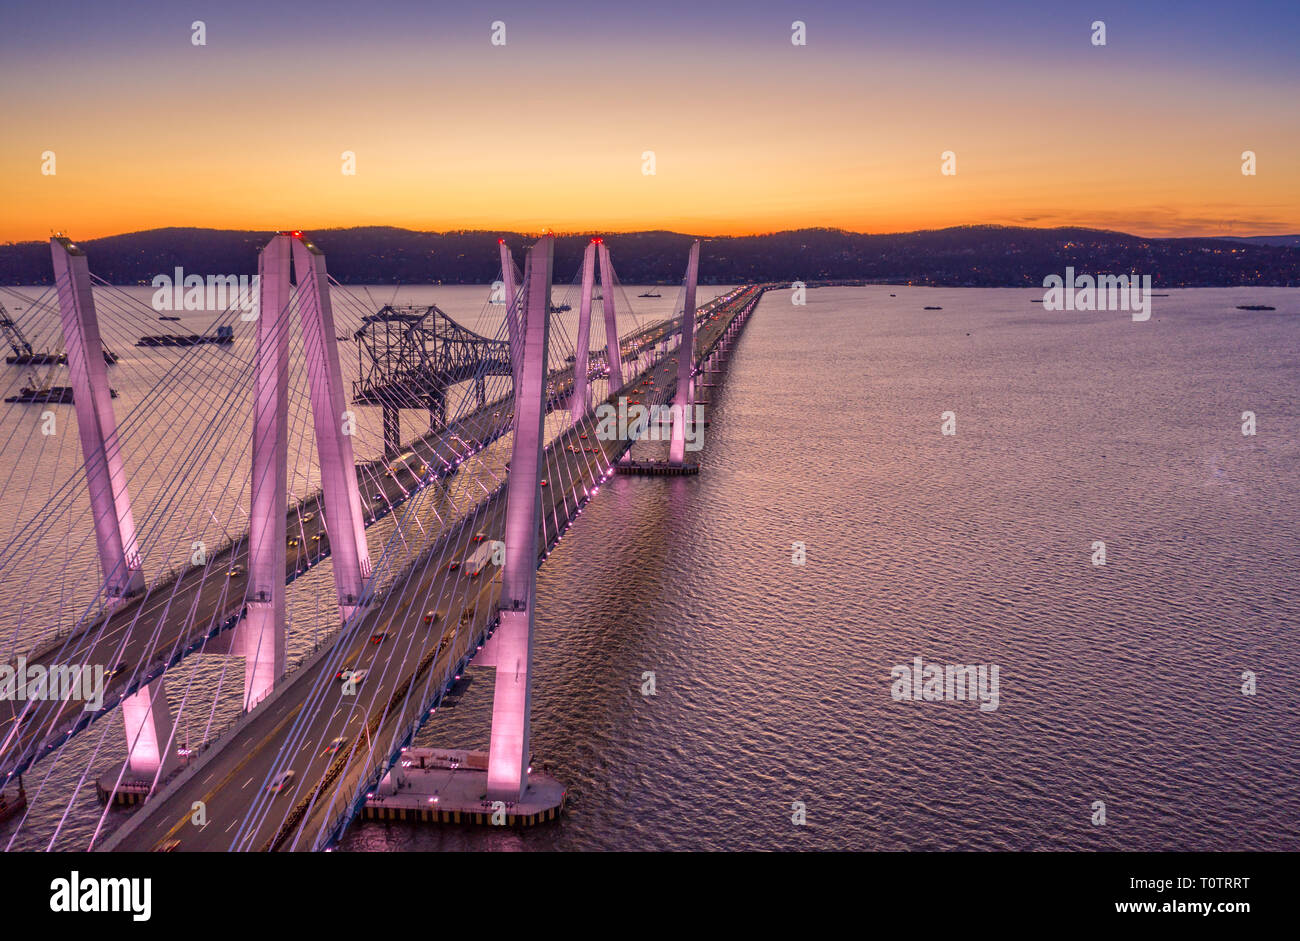 Aerial view of the New Tappan Zee Bridge, spanning Hudson River between Nyack and Tarrytown at dusk (with copy space) Stock Photo